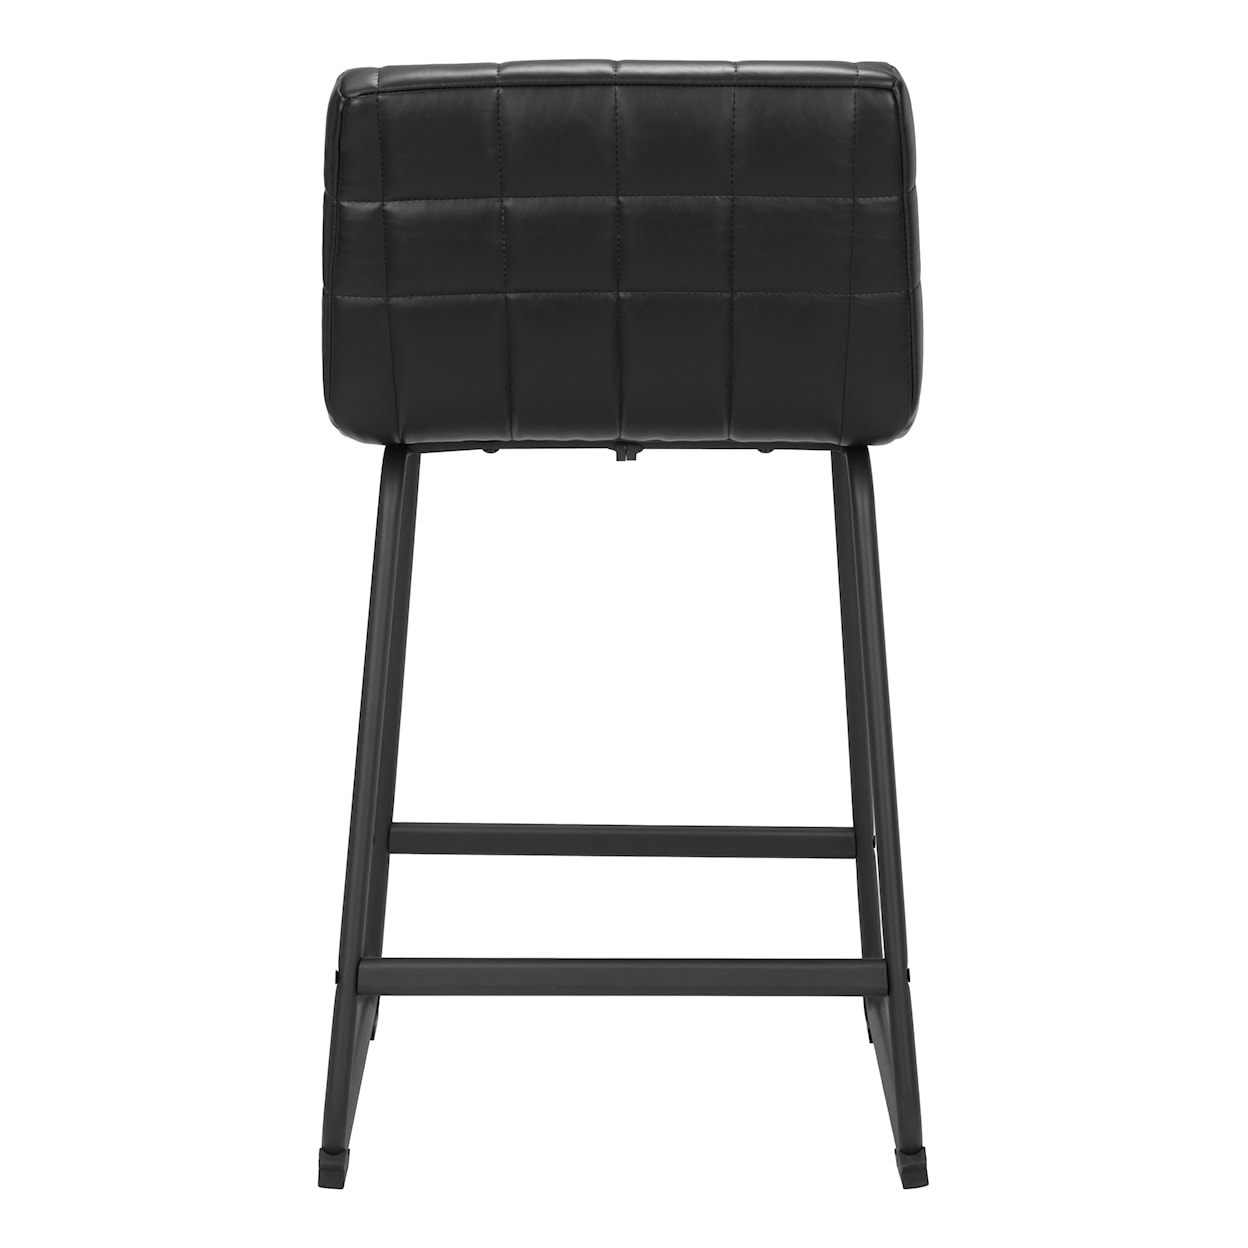 Zuo Pago Collection Counter Stool